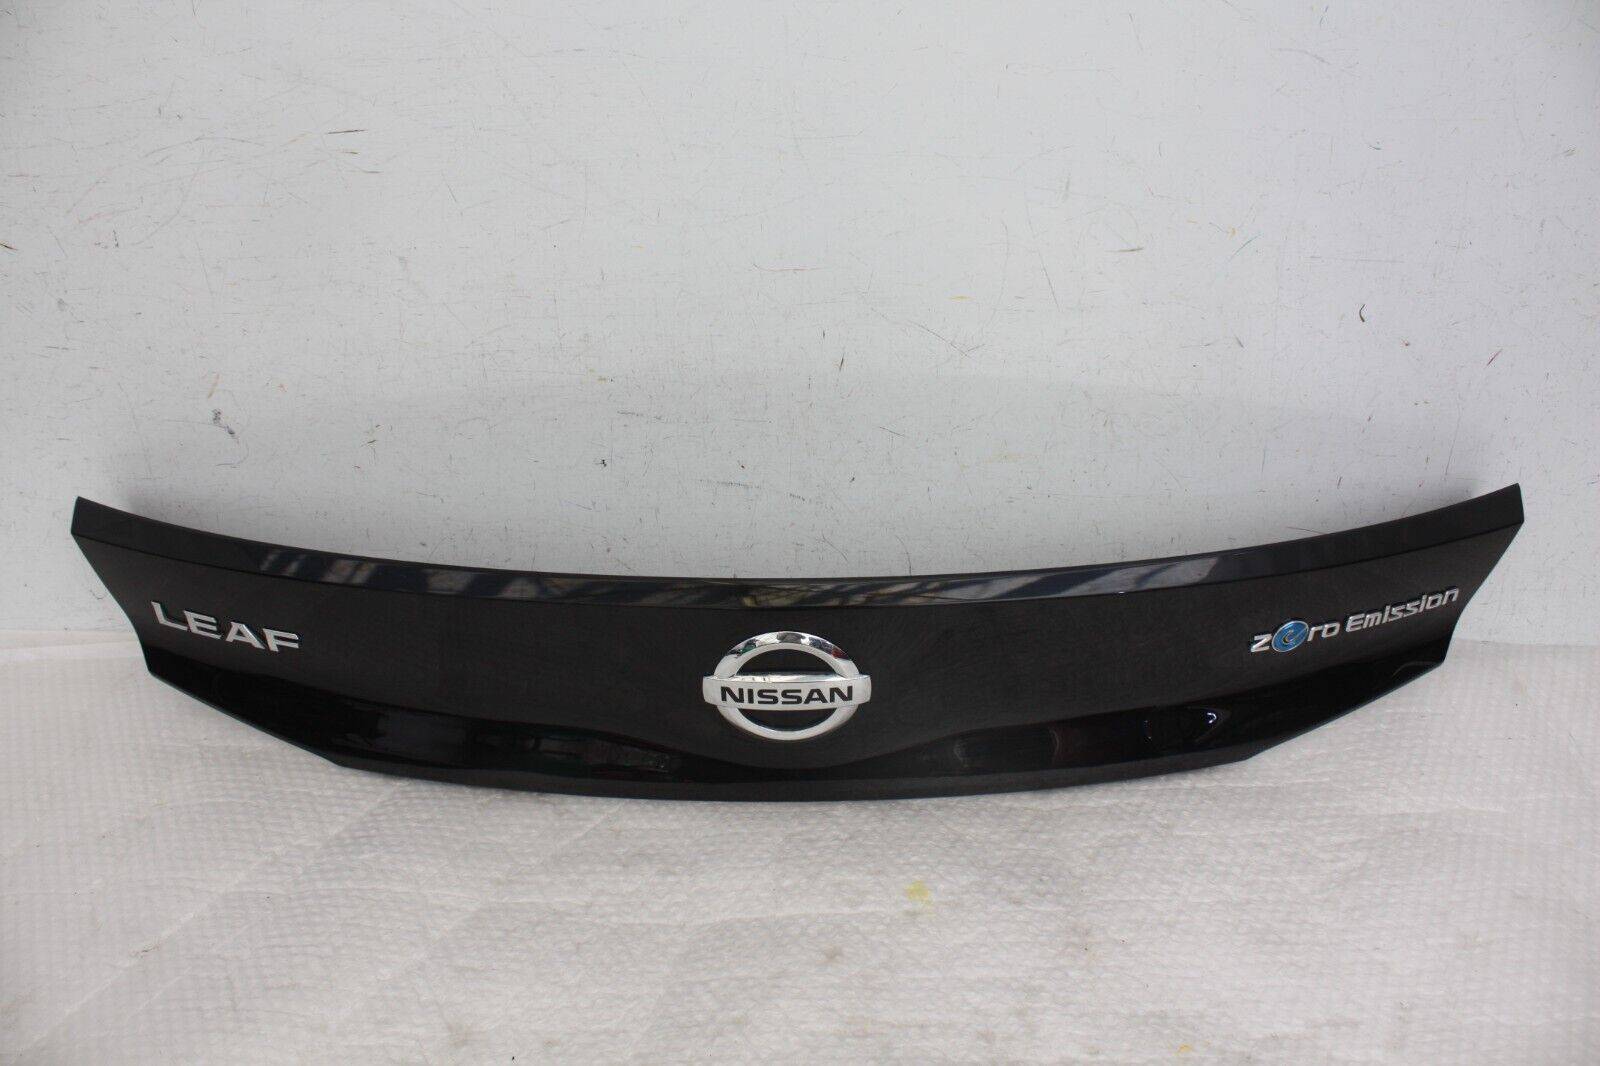 Nissan-Leaf-Rear-Tailgate-Trunk-Lid-Panel-Cover-Trim-90810-5SH0A-FIXING-DAMAGED-176365212247